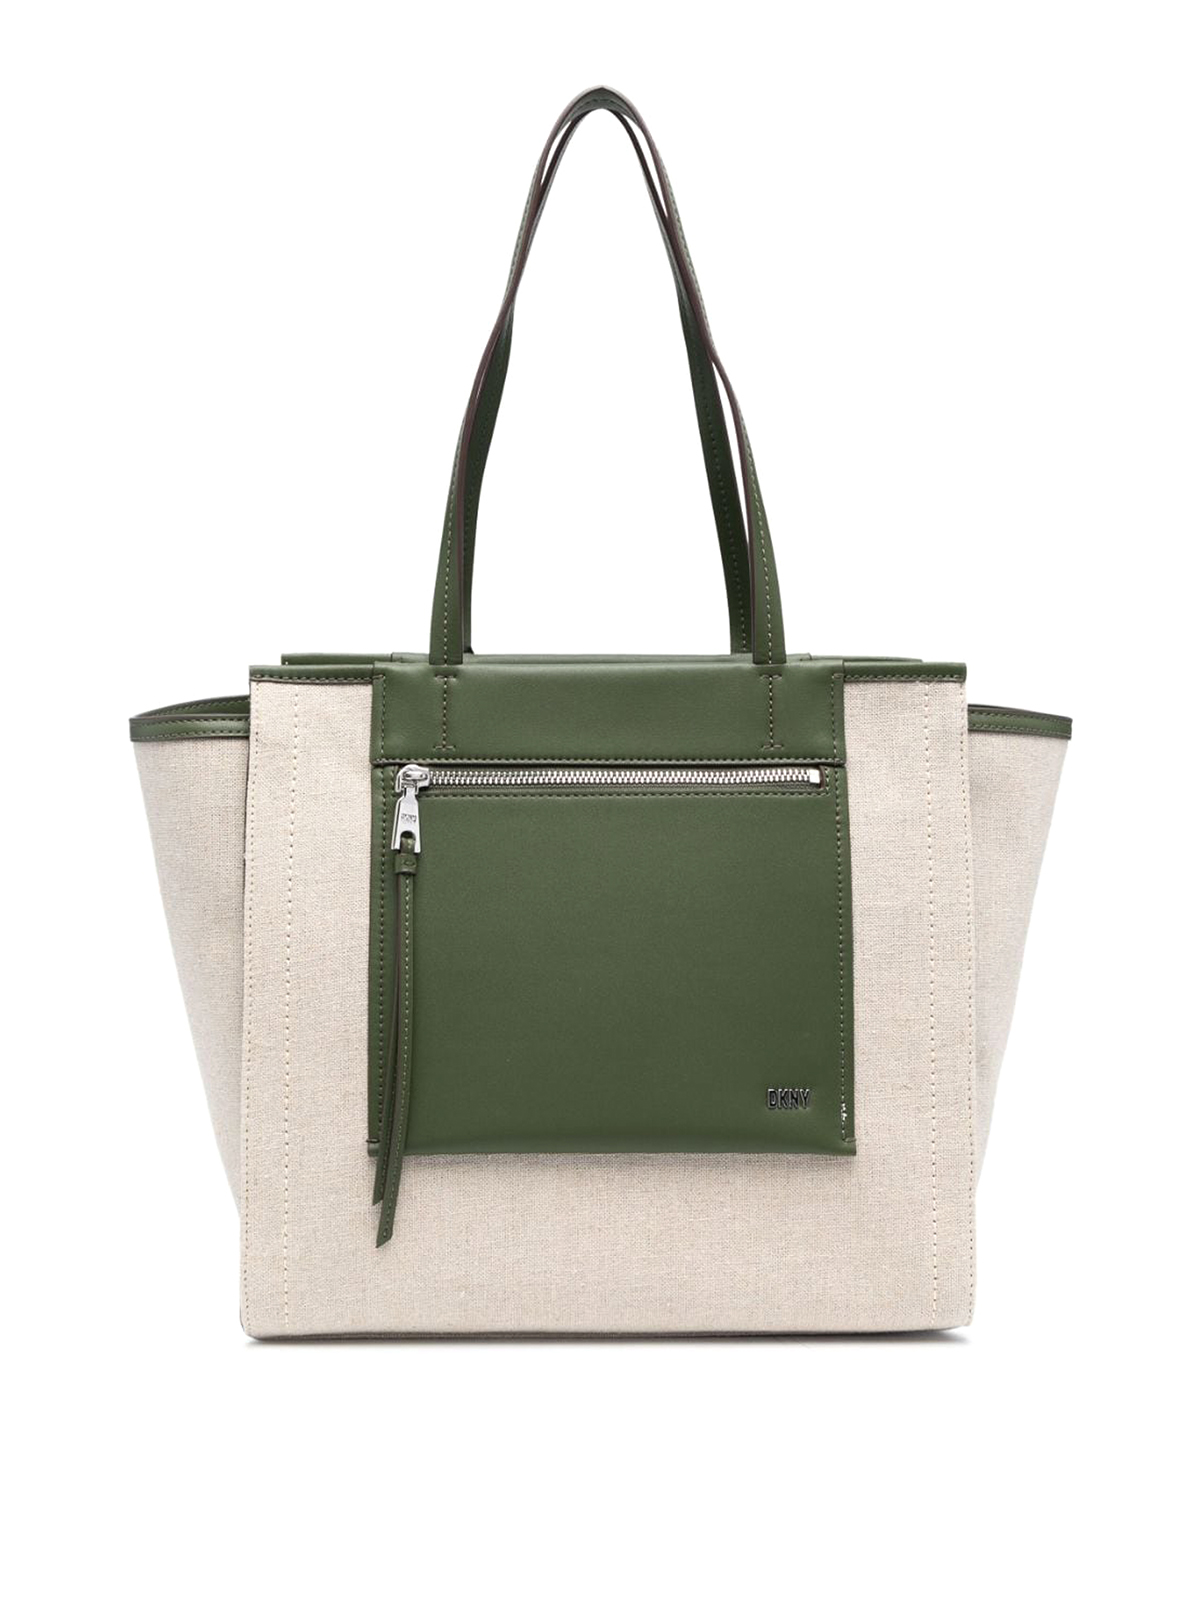 Dkny Pax Cotton Shopping Bag In Beige